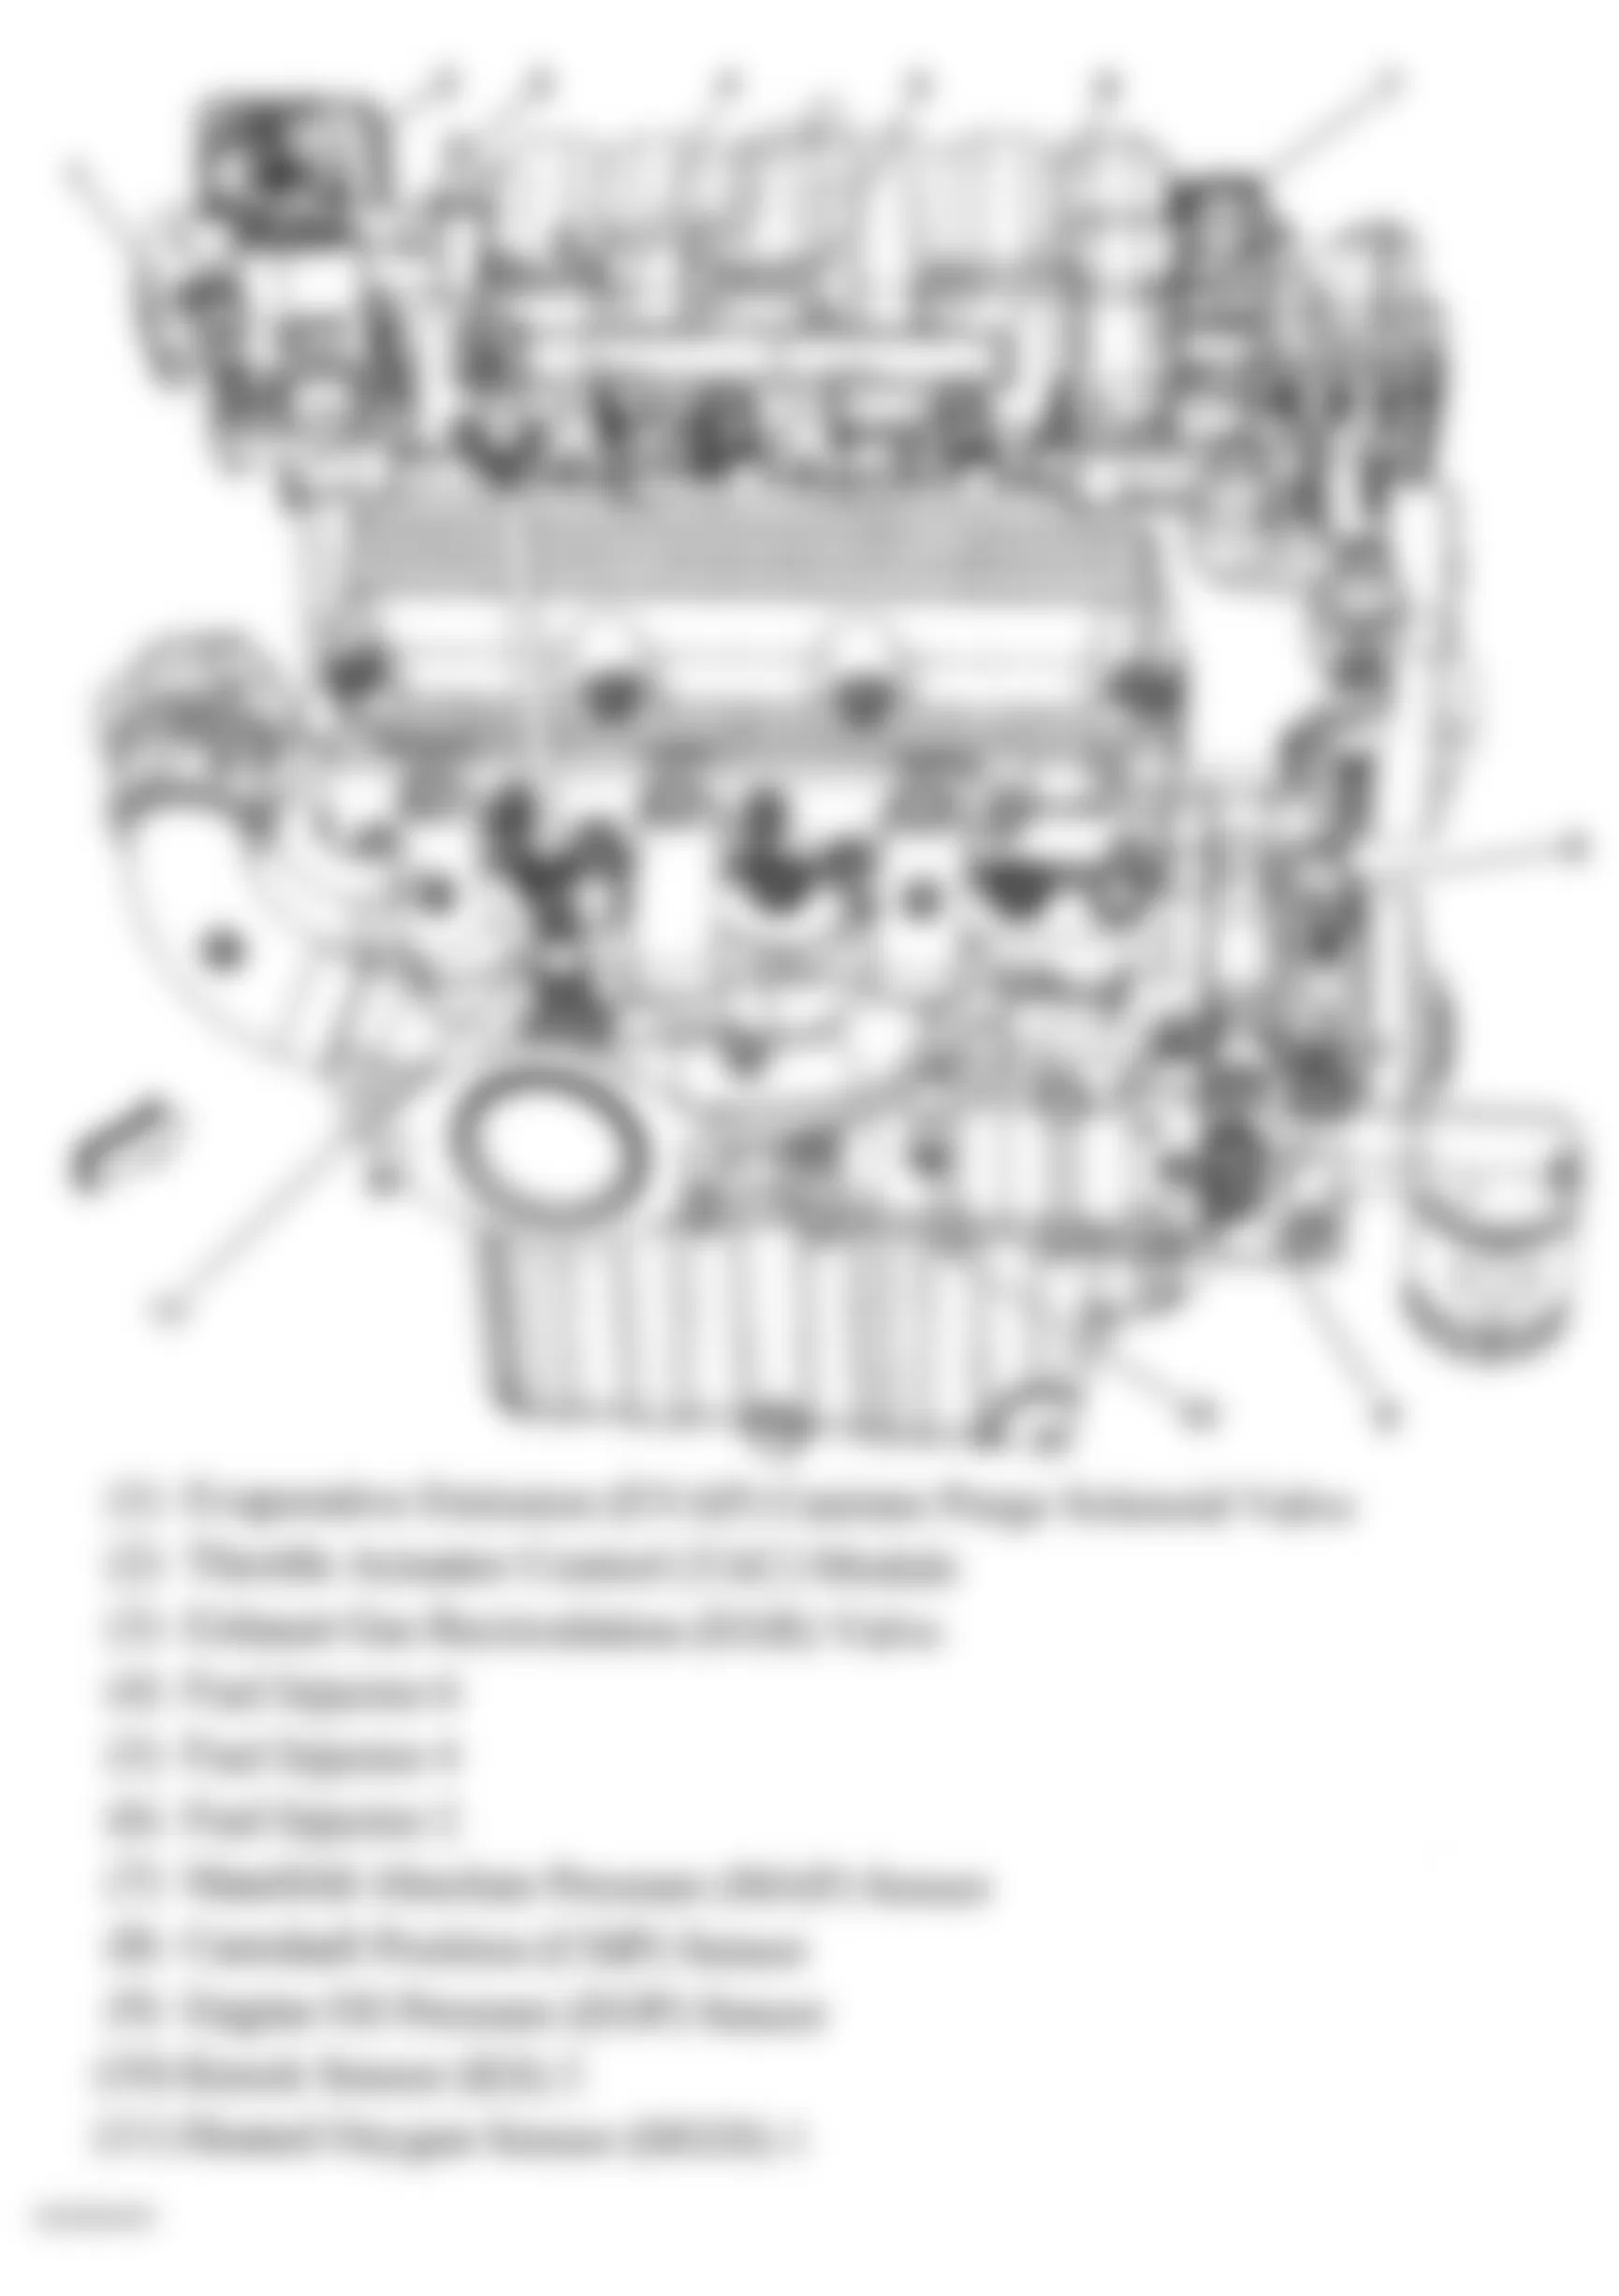 Buick LaCrosse CX 2005 - Component Locations -  Right Side Of Engine (3.8L)